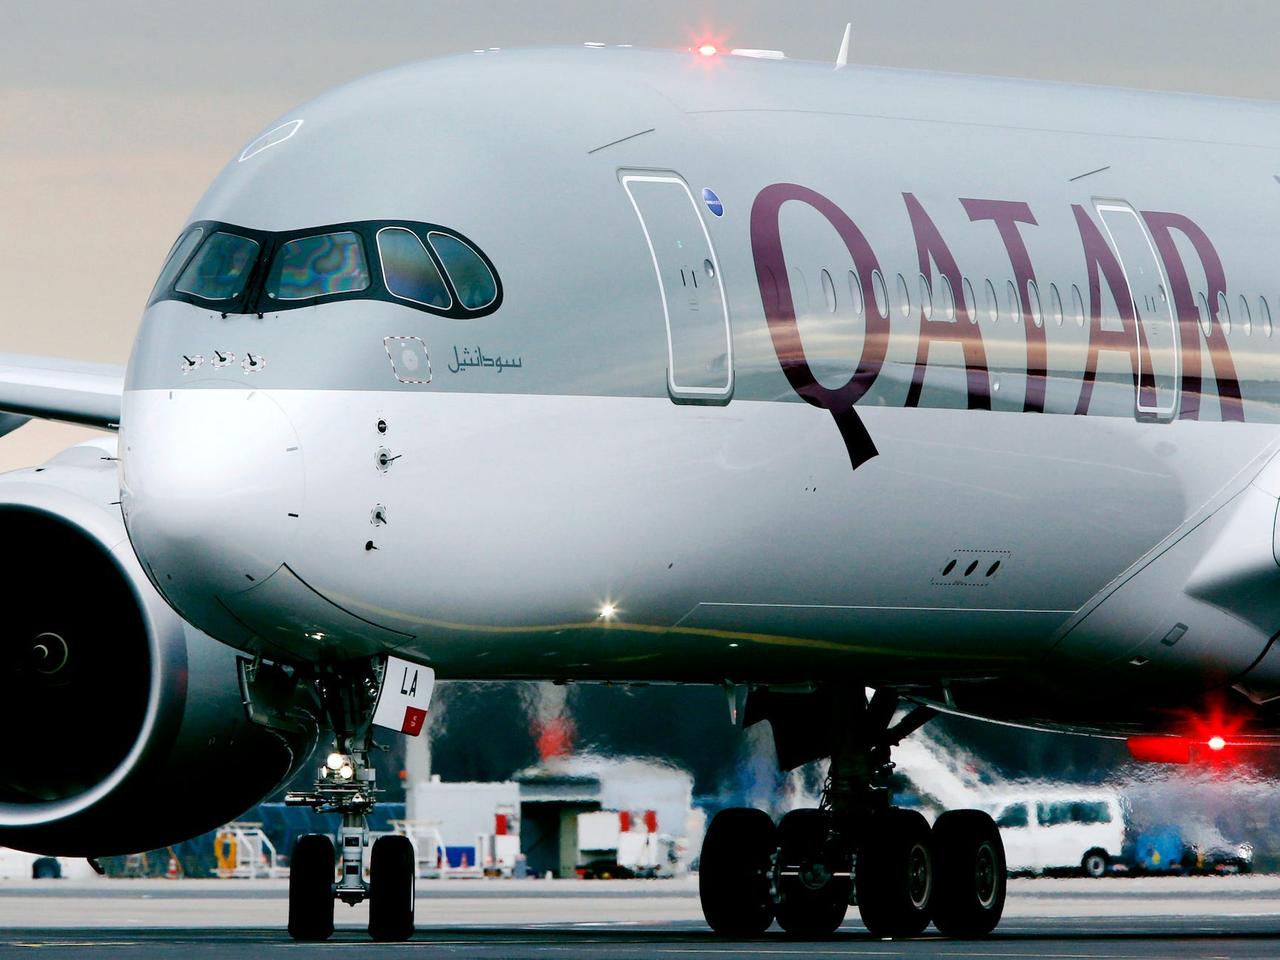 A Qatar Airways jet arriving from Doha, Qatar, at the airport in Frankfurt, Germany, in January 2015